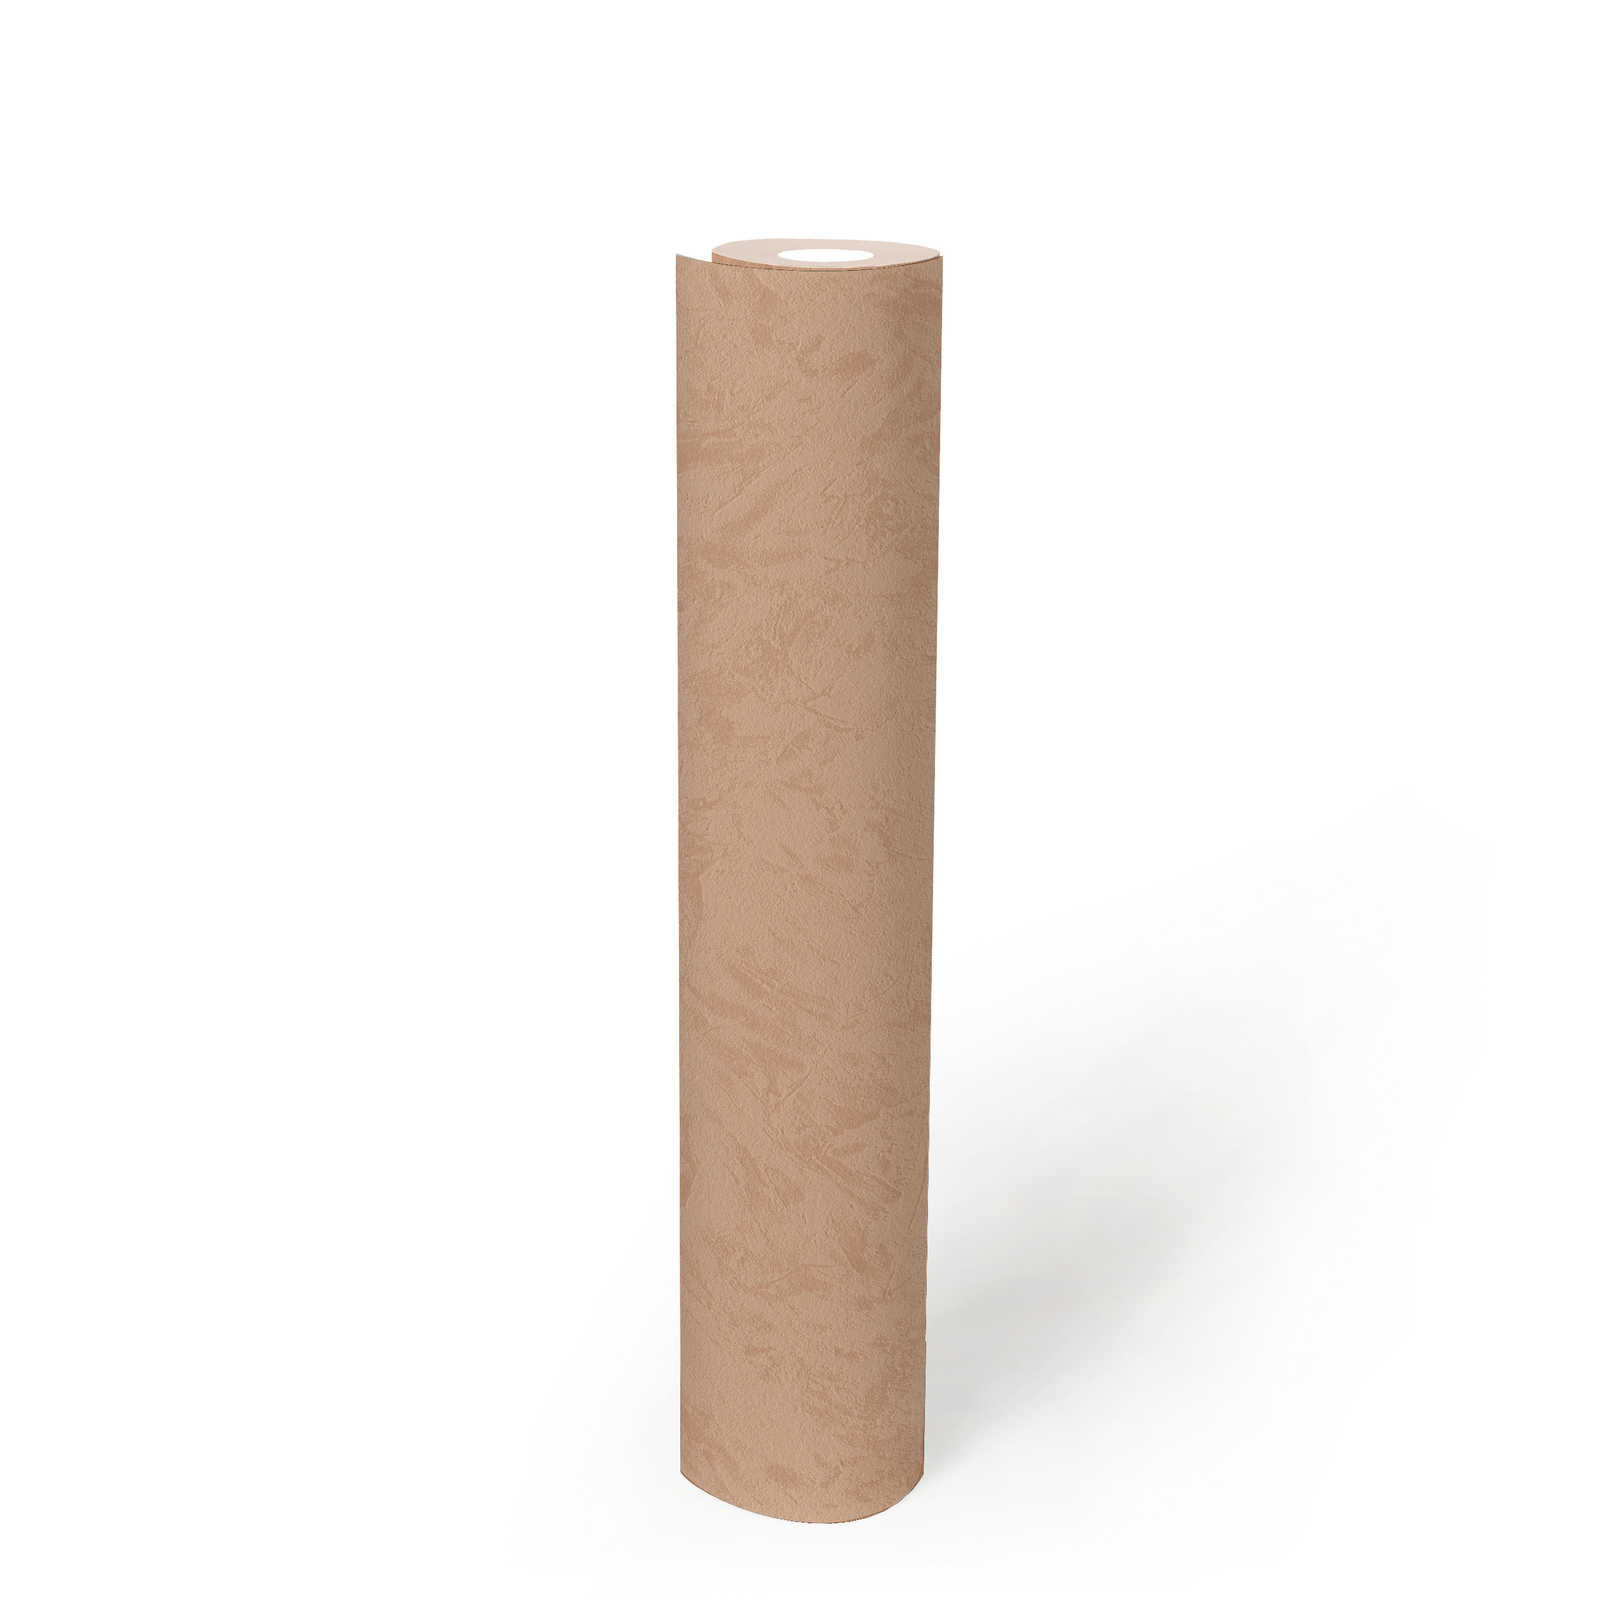             Terracotta non-woven wallpaper with wiped plaster look - orange
        